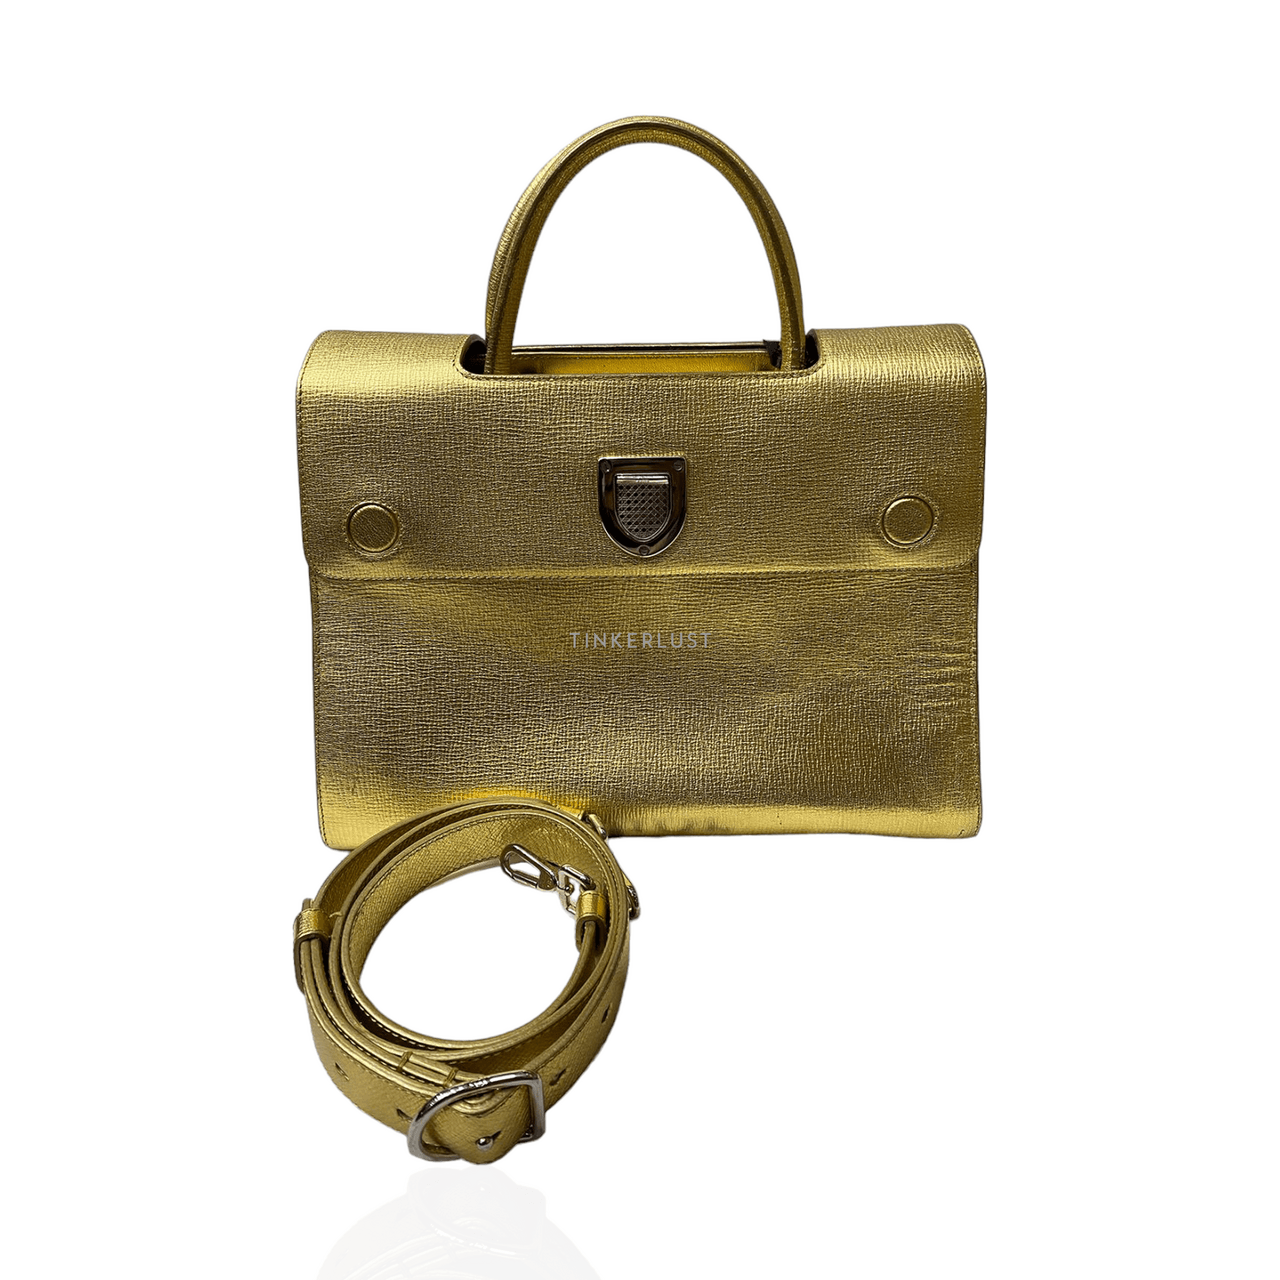 Christian Dior Diorever Large Gold Leather SHW Satchel